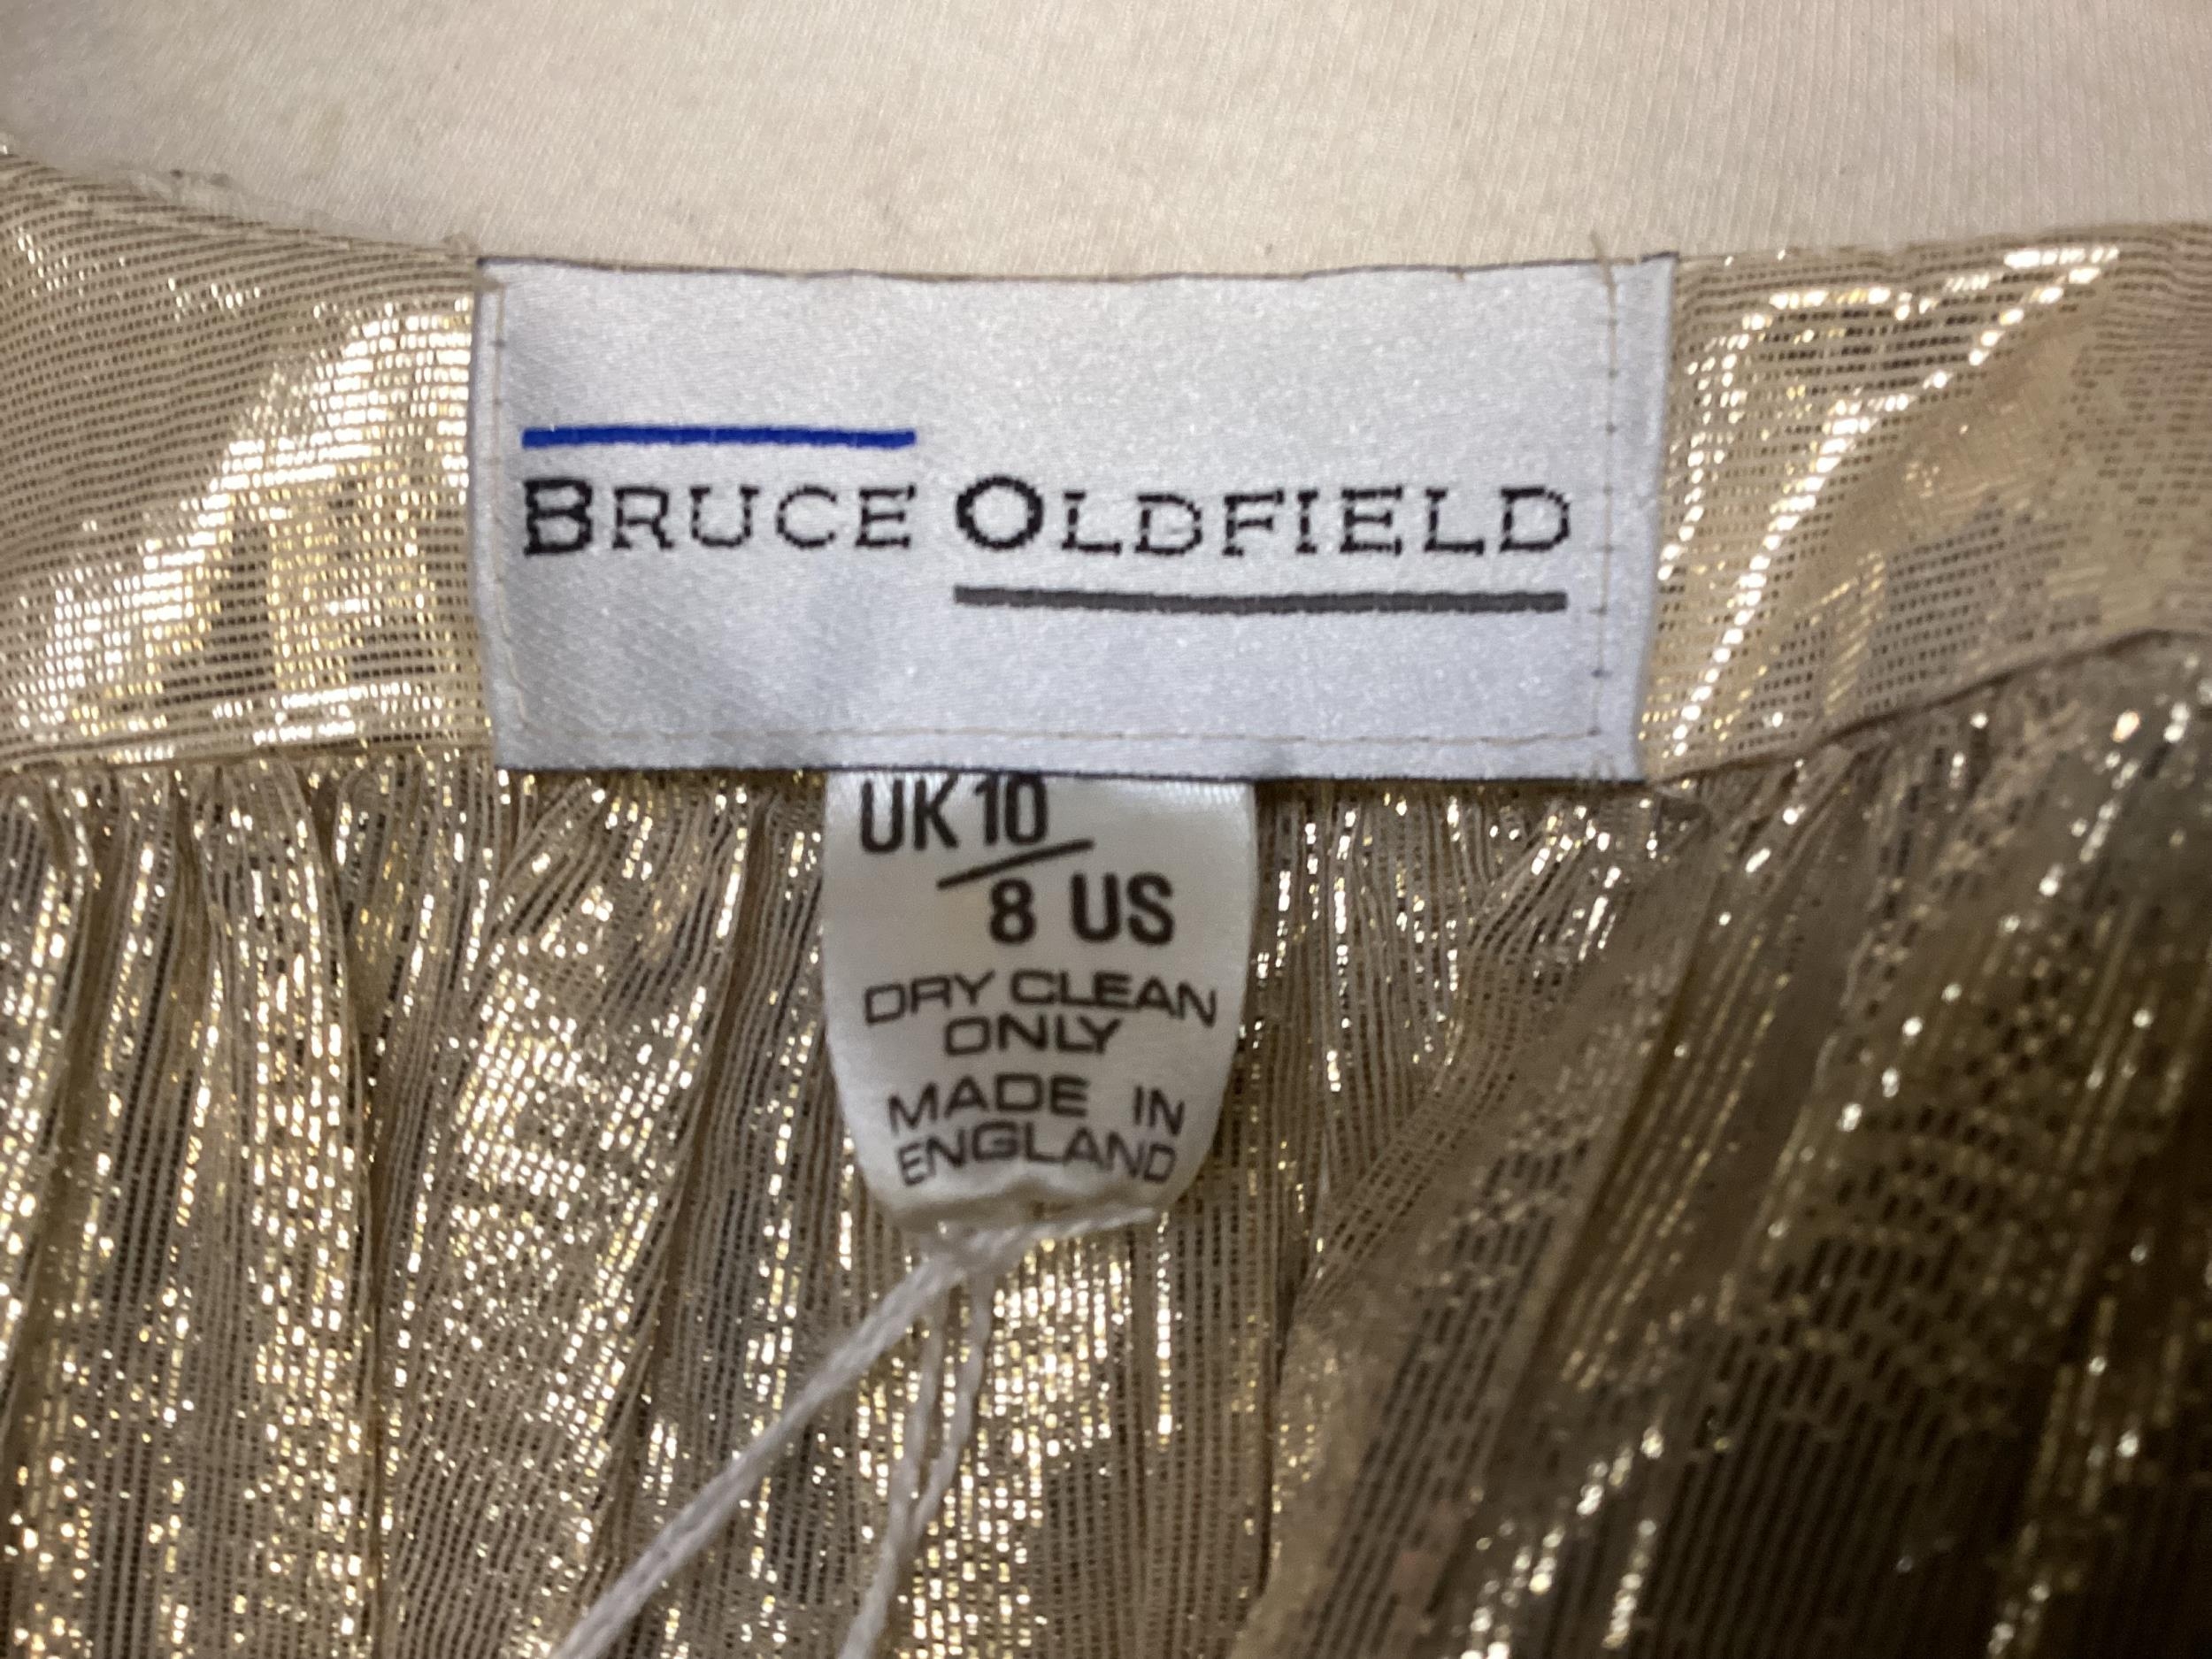 Bruce Oldfield, silk cream suit, couture, cream silk full length dress, condition a mark see - Image 8 of 23